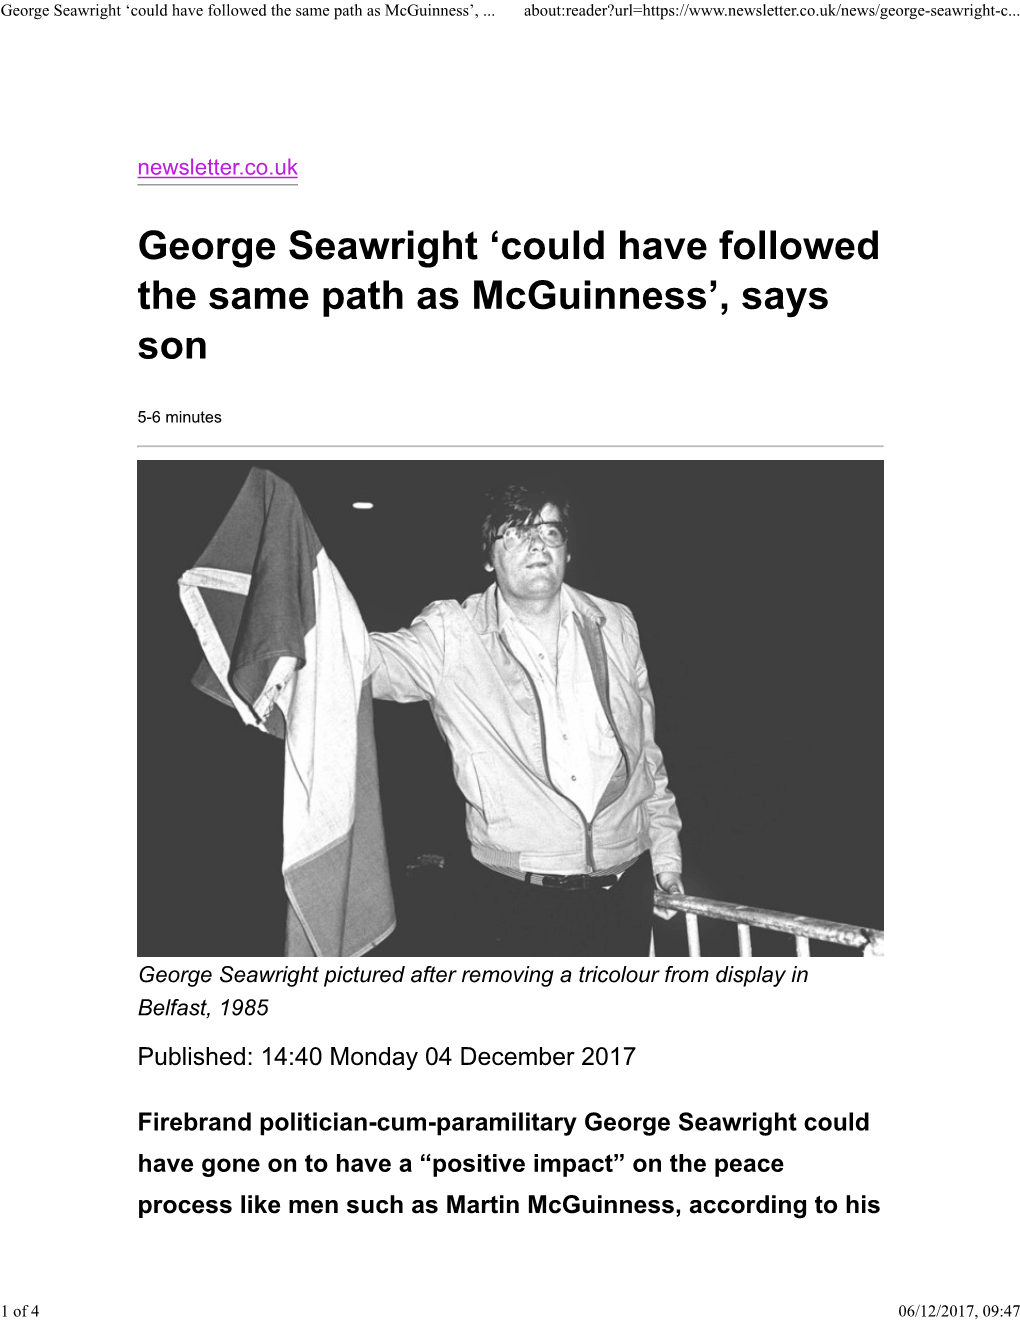 George Seawright 'Could Have Followed the Same Path As